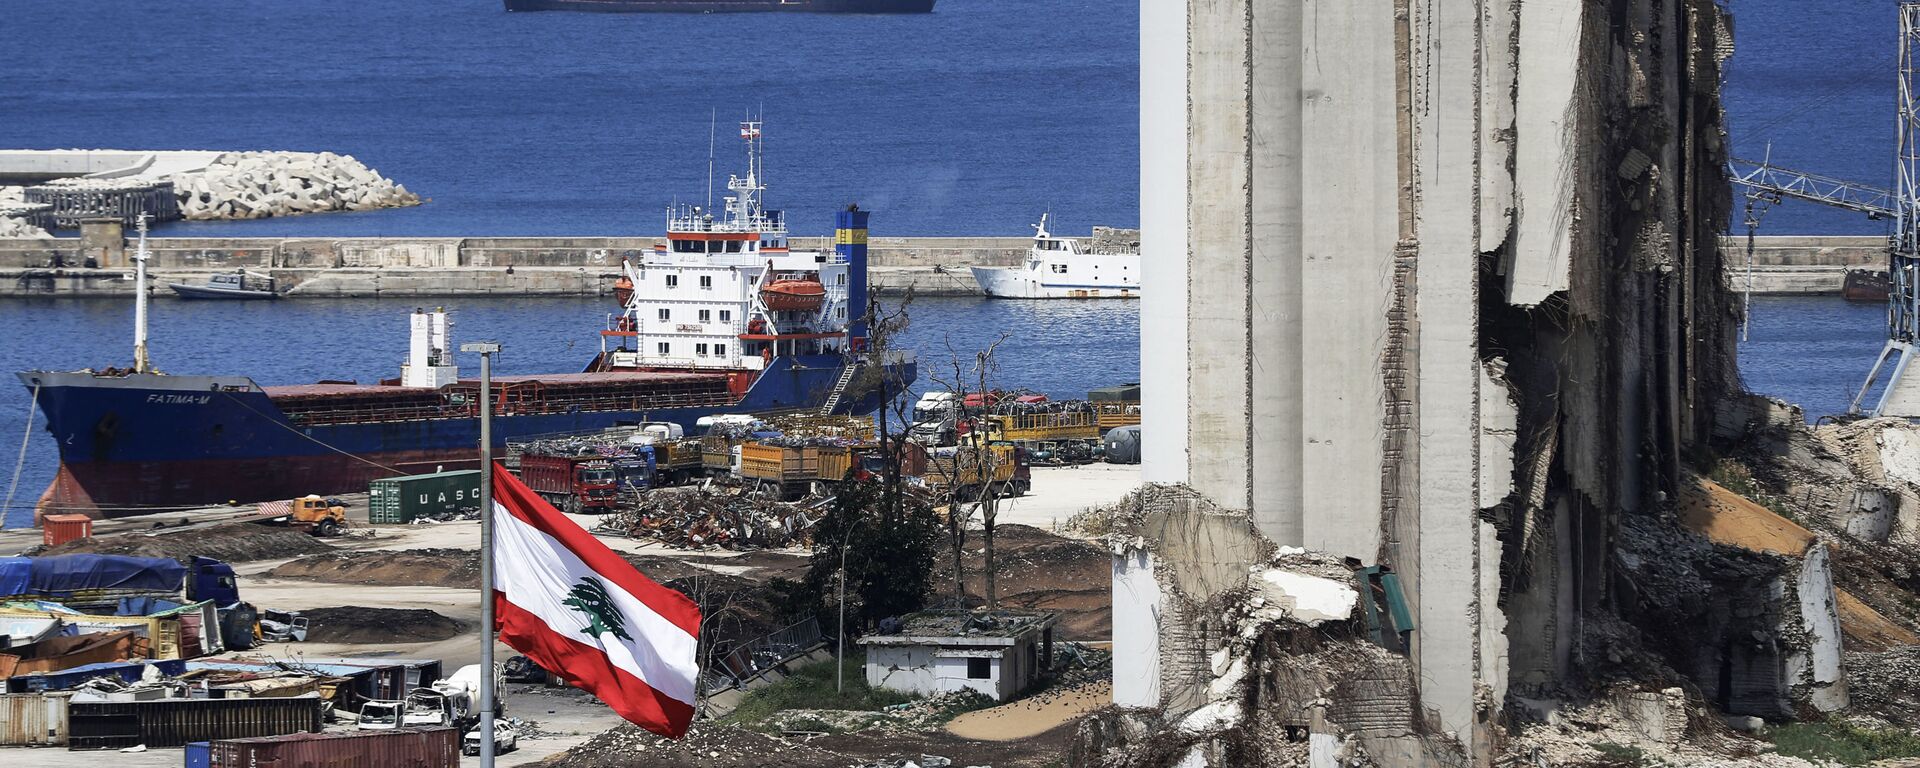 A picture shows a view of the damaged grain silos at the port of the Lebanese capital Beirut, on April 9, 2021, still reeling from the destruction due to a catastrophic blast in a harbour storage unit last August that killed more than 200 people and damaged swathes of the capital, with the Togo-flagged Fatima M bulk carrier ship moored nearby.  - Sputnik International, 1920, 03.09.2021